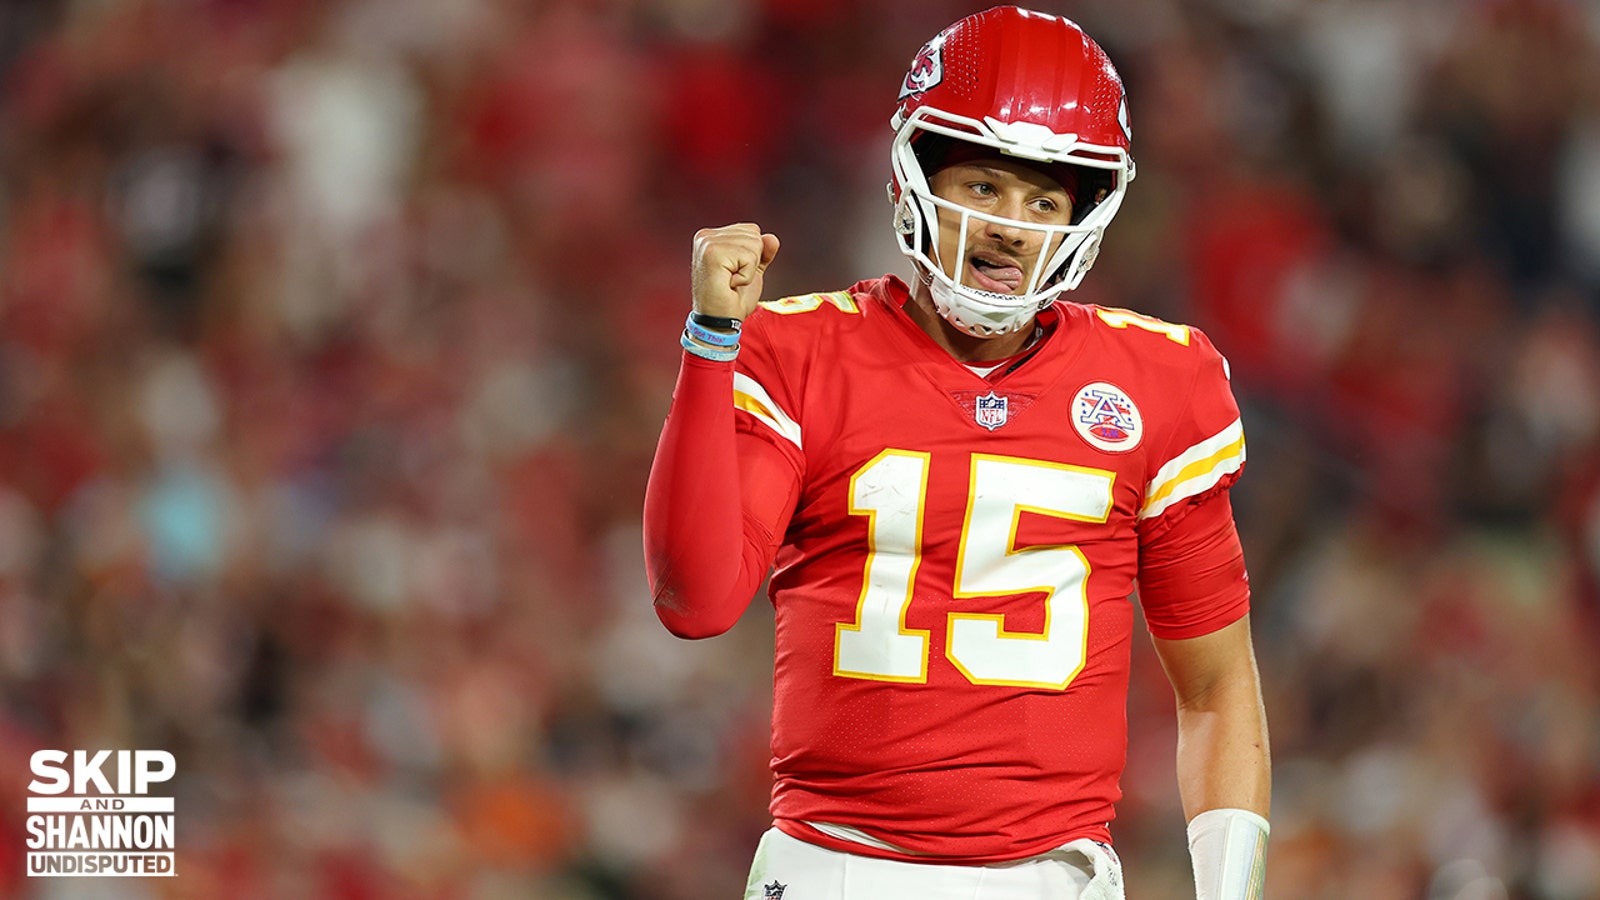 Patrick Mahomes touted as the best quarterback in the NFL